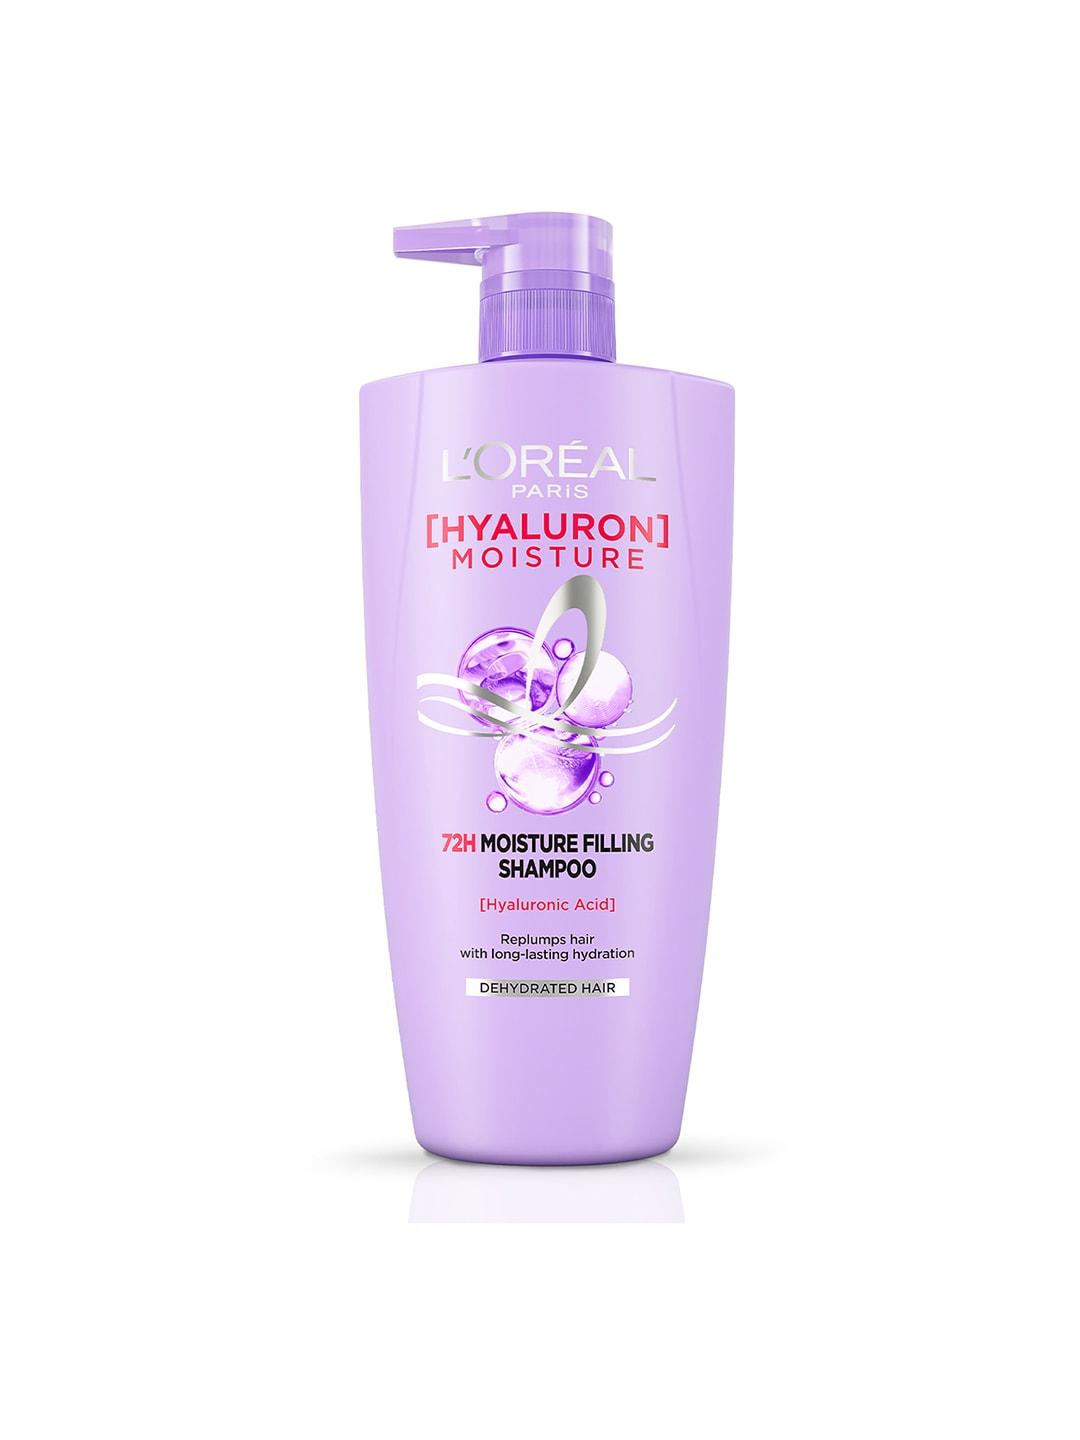 LOreal Paris Hyaluron Moisture 72H Moisture Filling Shampoo for Dehydrated Hair - 1L